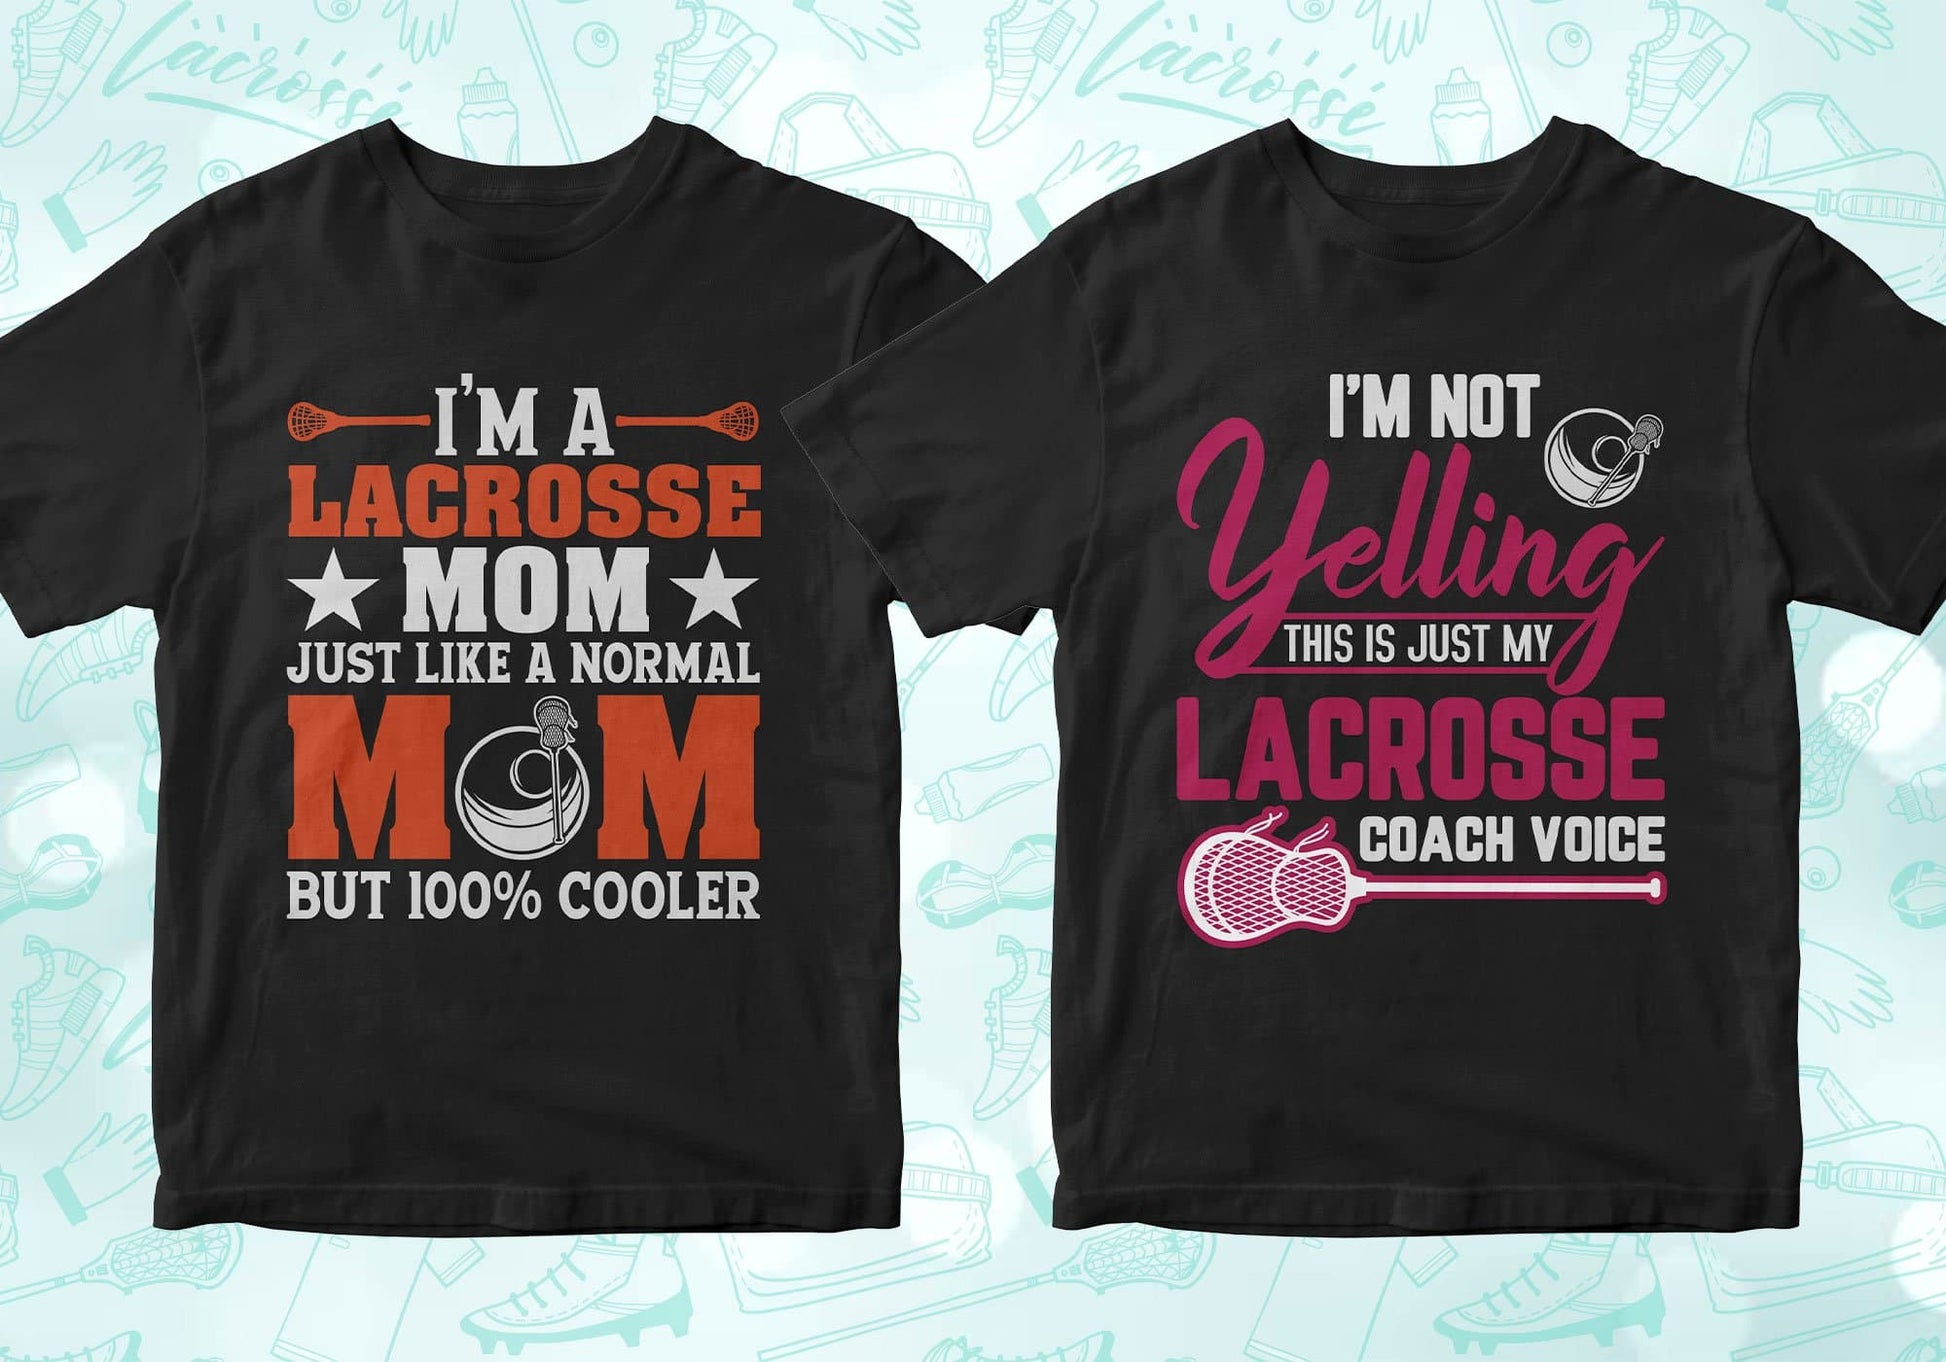 I'm a lacrosse mom just like a normal mom but 100% cooler, i'm not yelling this is just my lacrosse coach voice, lacrosse shirts lacrosse tshirt lacrosse t shirts lacrosse shirt designs lacrosse graphic